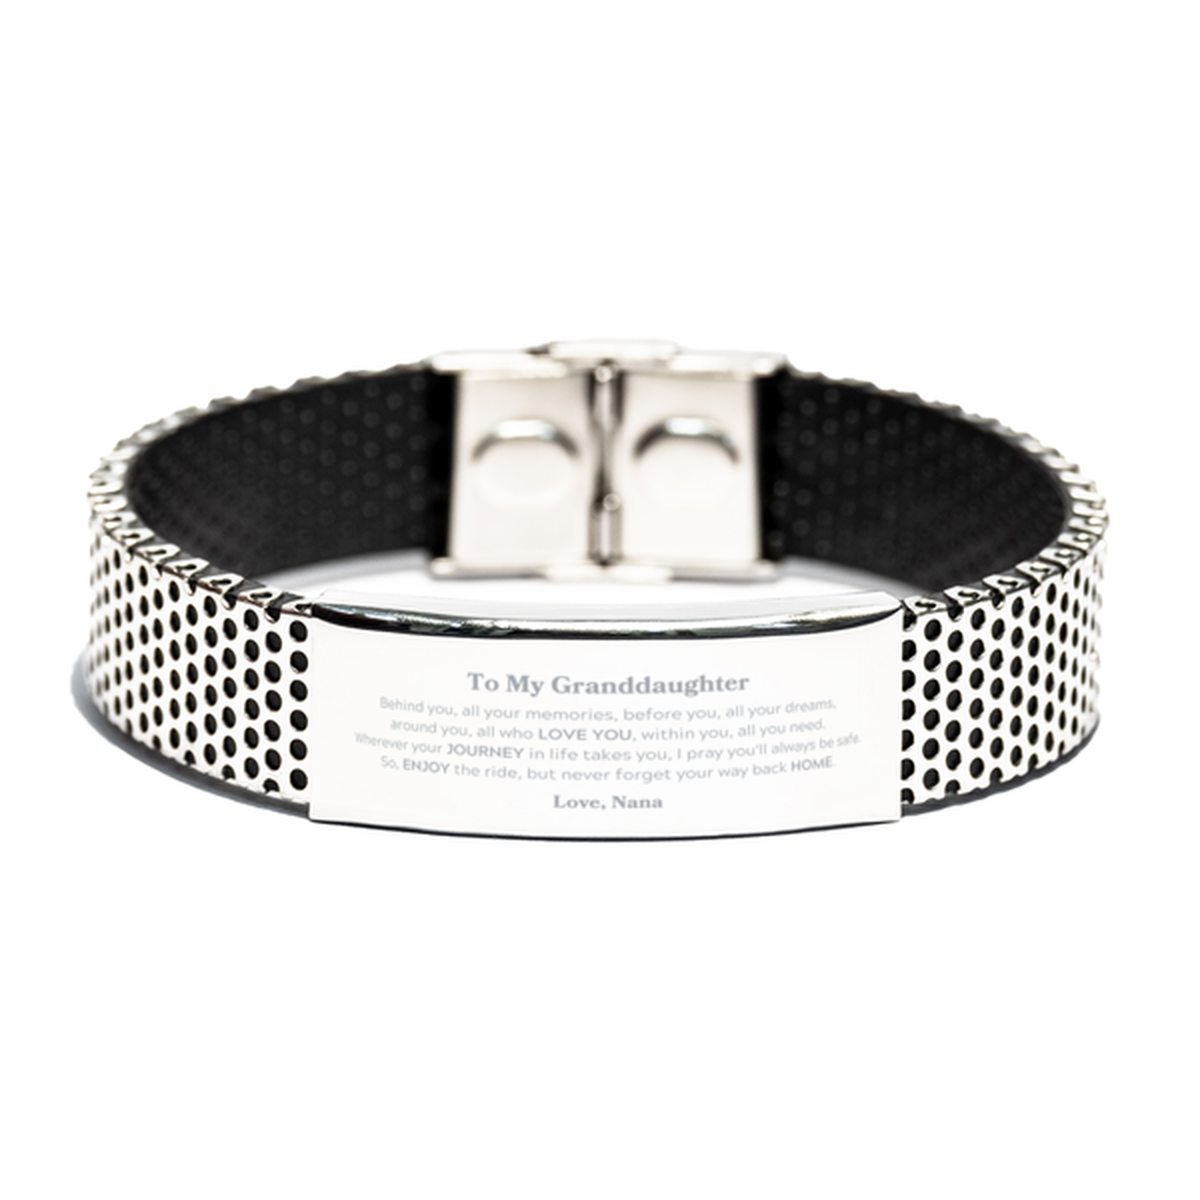 To My Granddaughter Graduation Gifts from Nana, Granddaughter Stainless Steel Bracelet Christmas Birthday Gifts for Granddaughter Behind you, all your memories, before you, all your dreams. Love, Nana